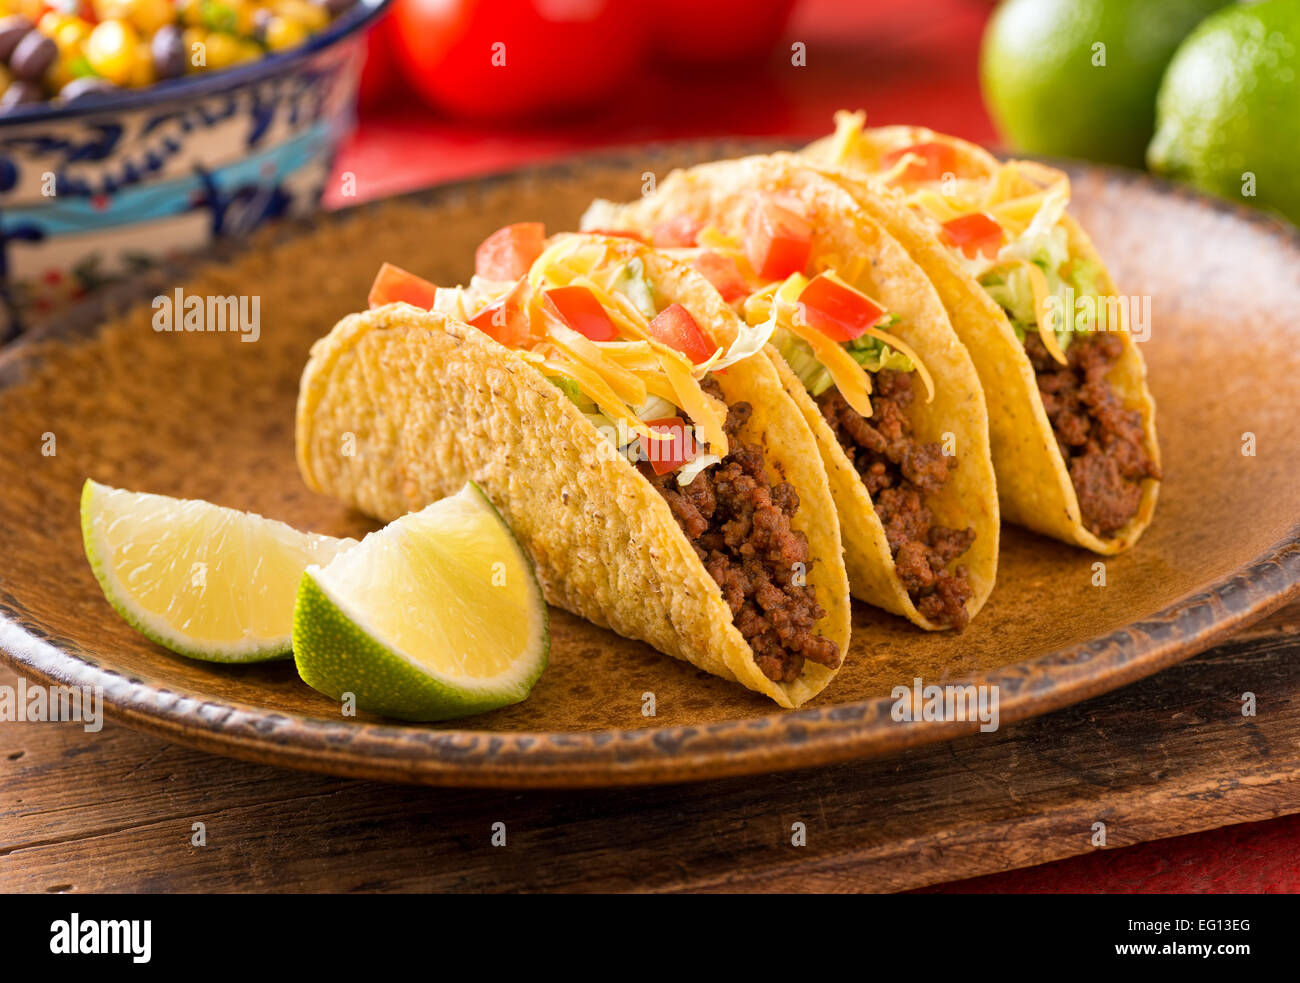 A plate of delicious tacos with lime, tomato, lettuce, and cheese. Stock Photo